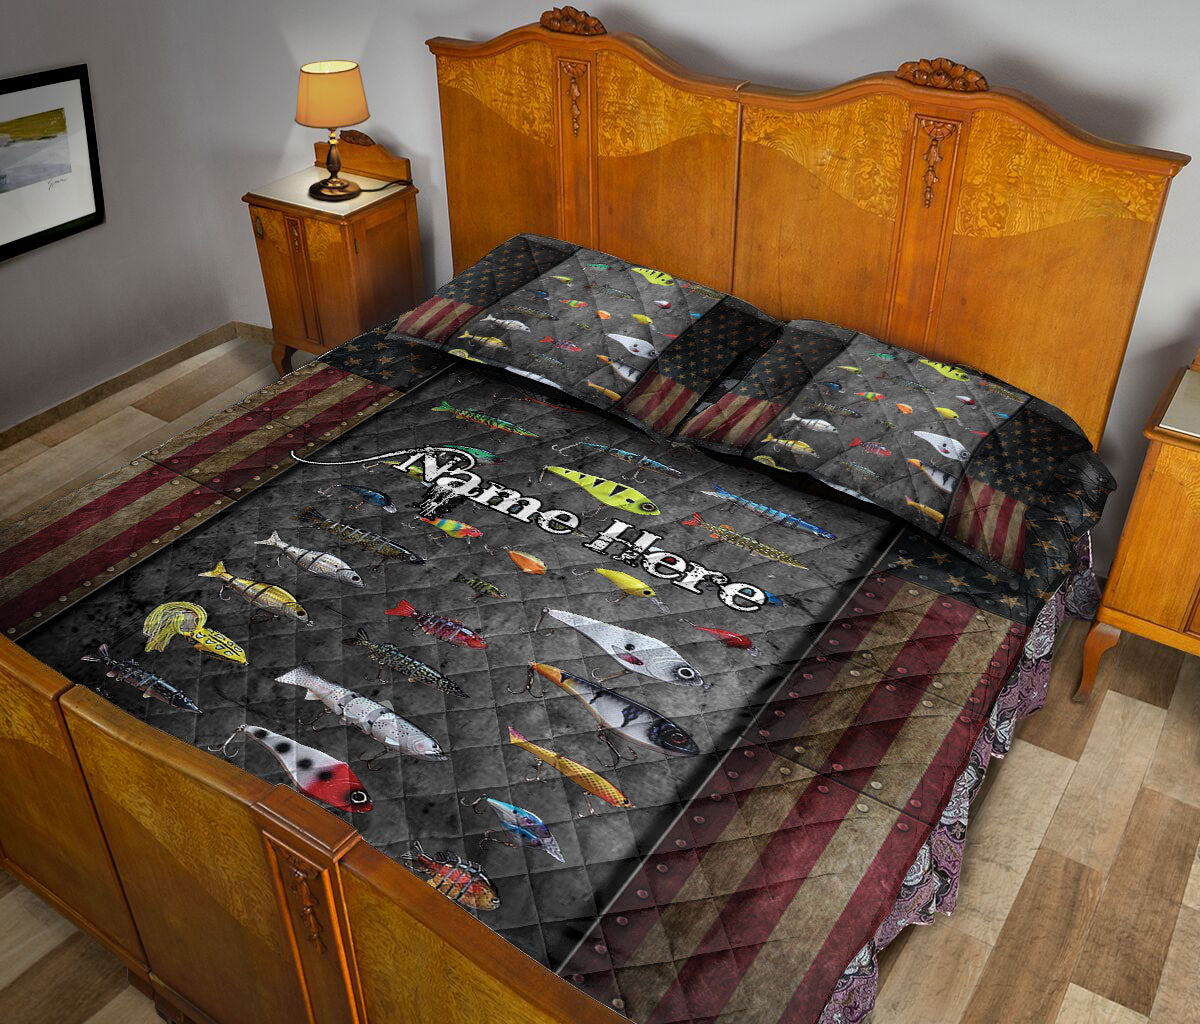 Fishing Quilt Cover Set